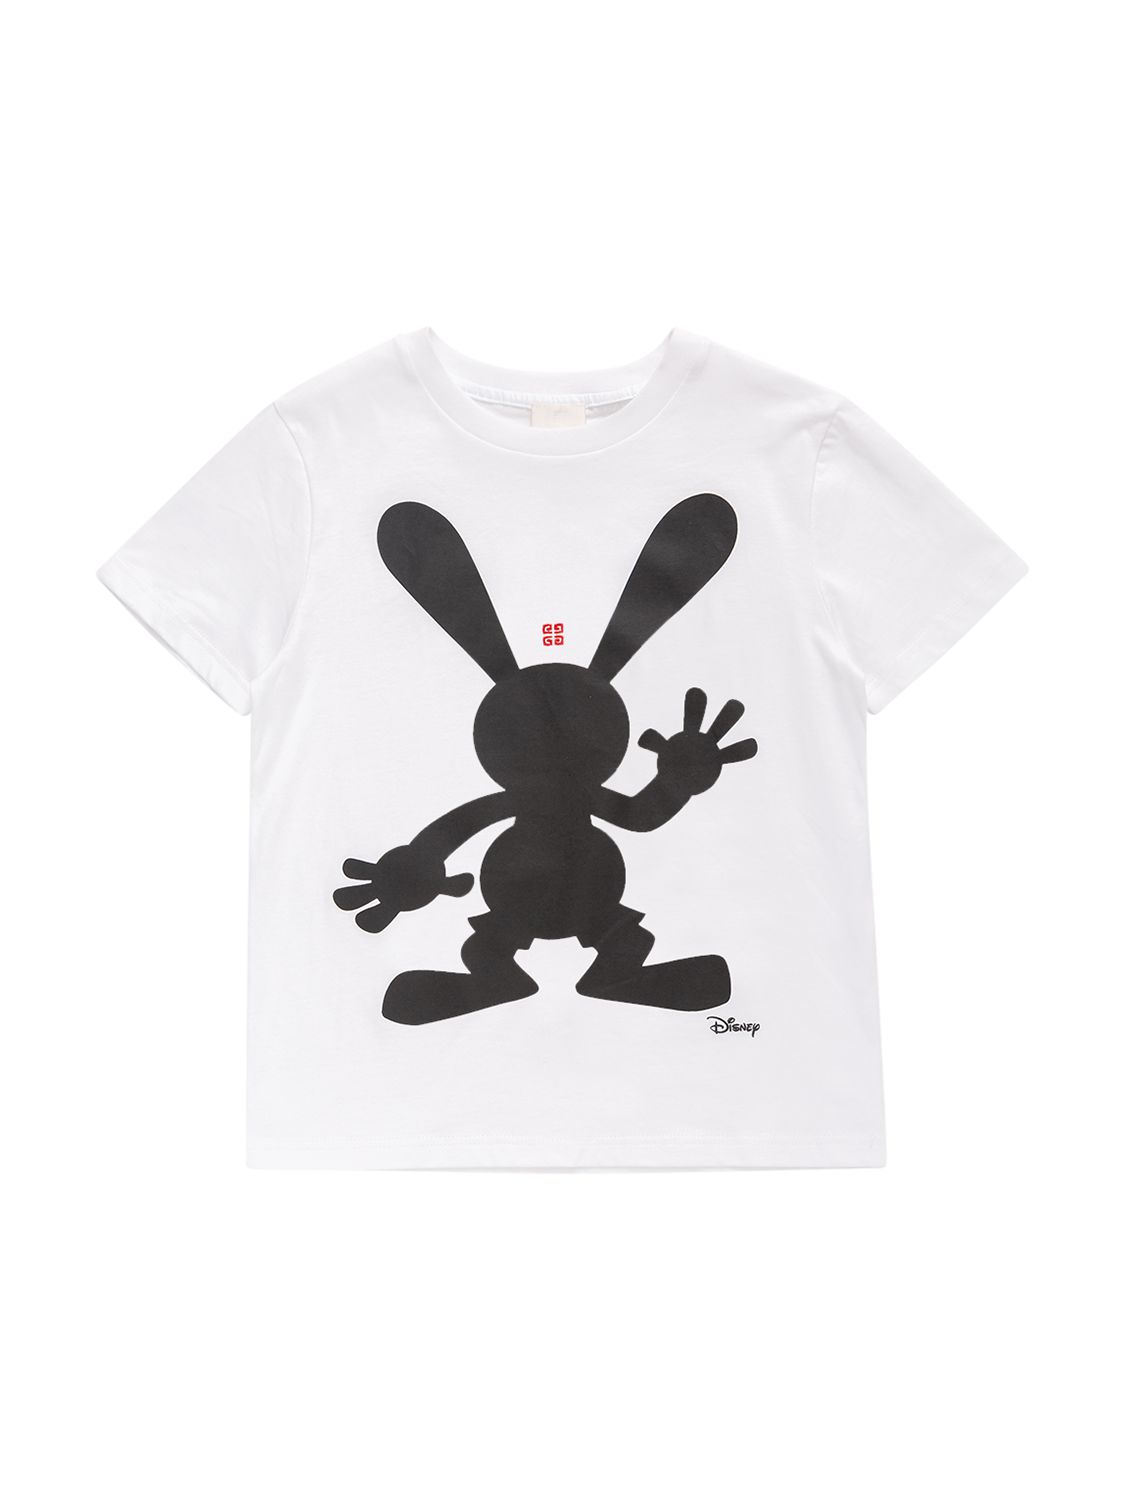 Givenchy Disney Printed Organic Cotton T-shirt In White